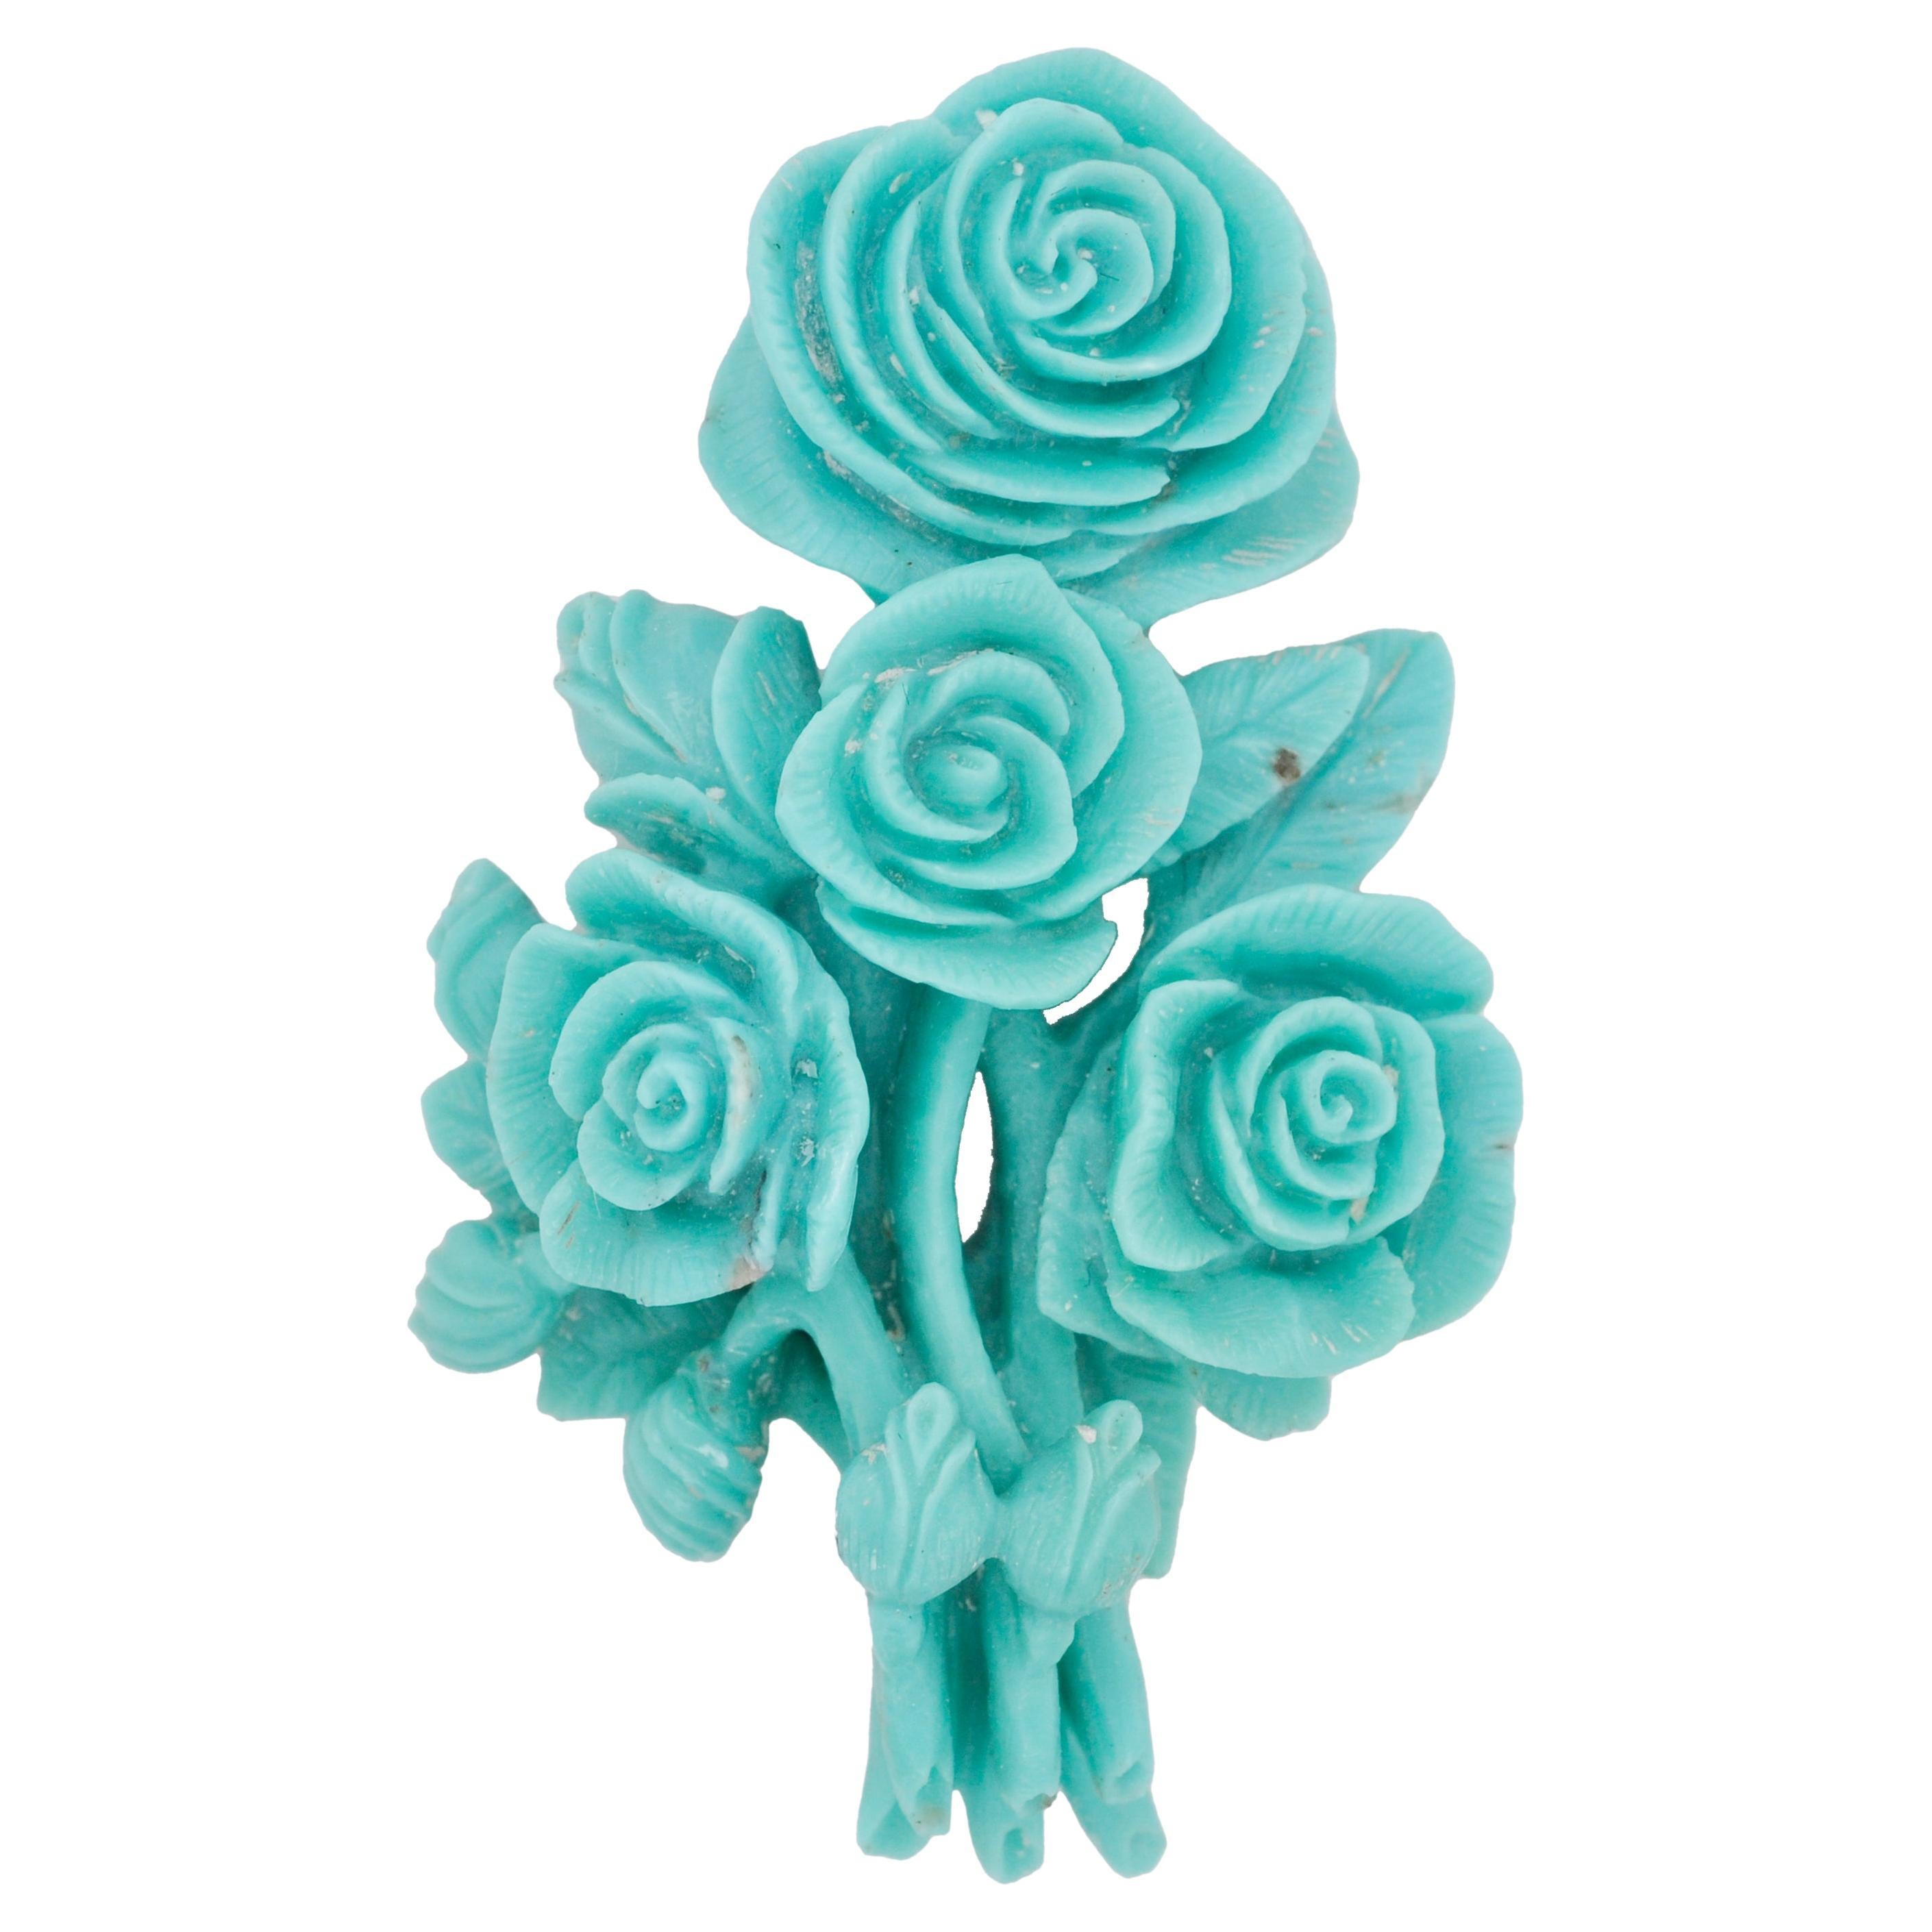 Hand-Carved 54.41 Carats Natural Arizona Turquoise Bouquet Loose Gemstone